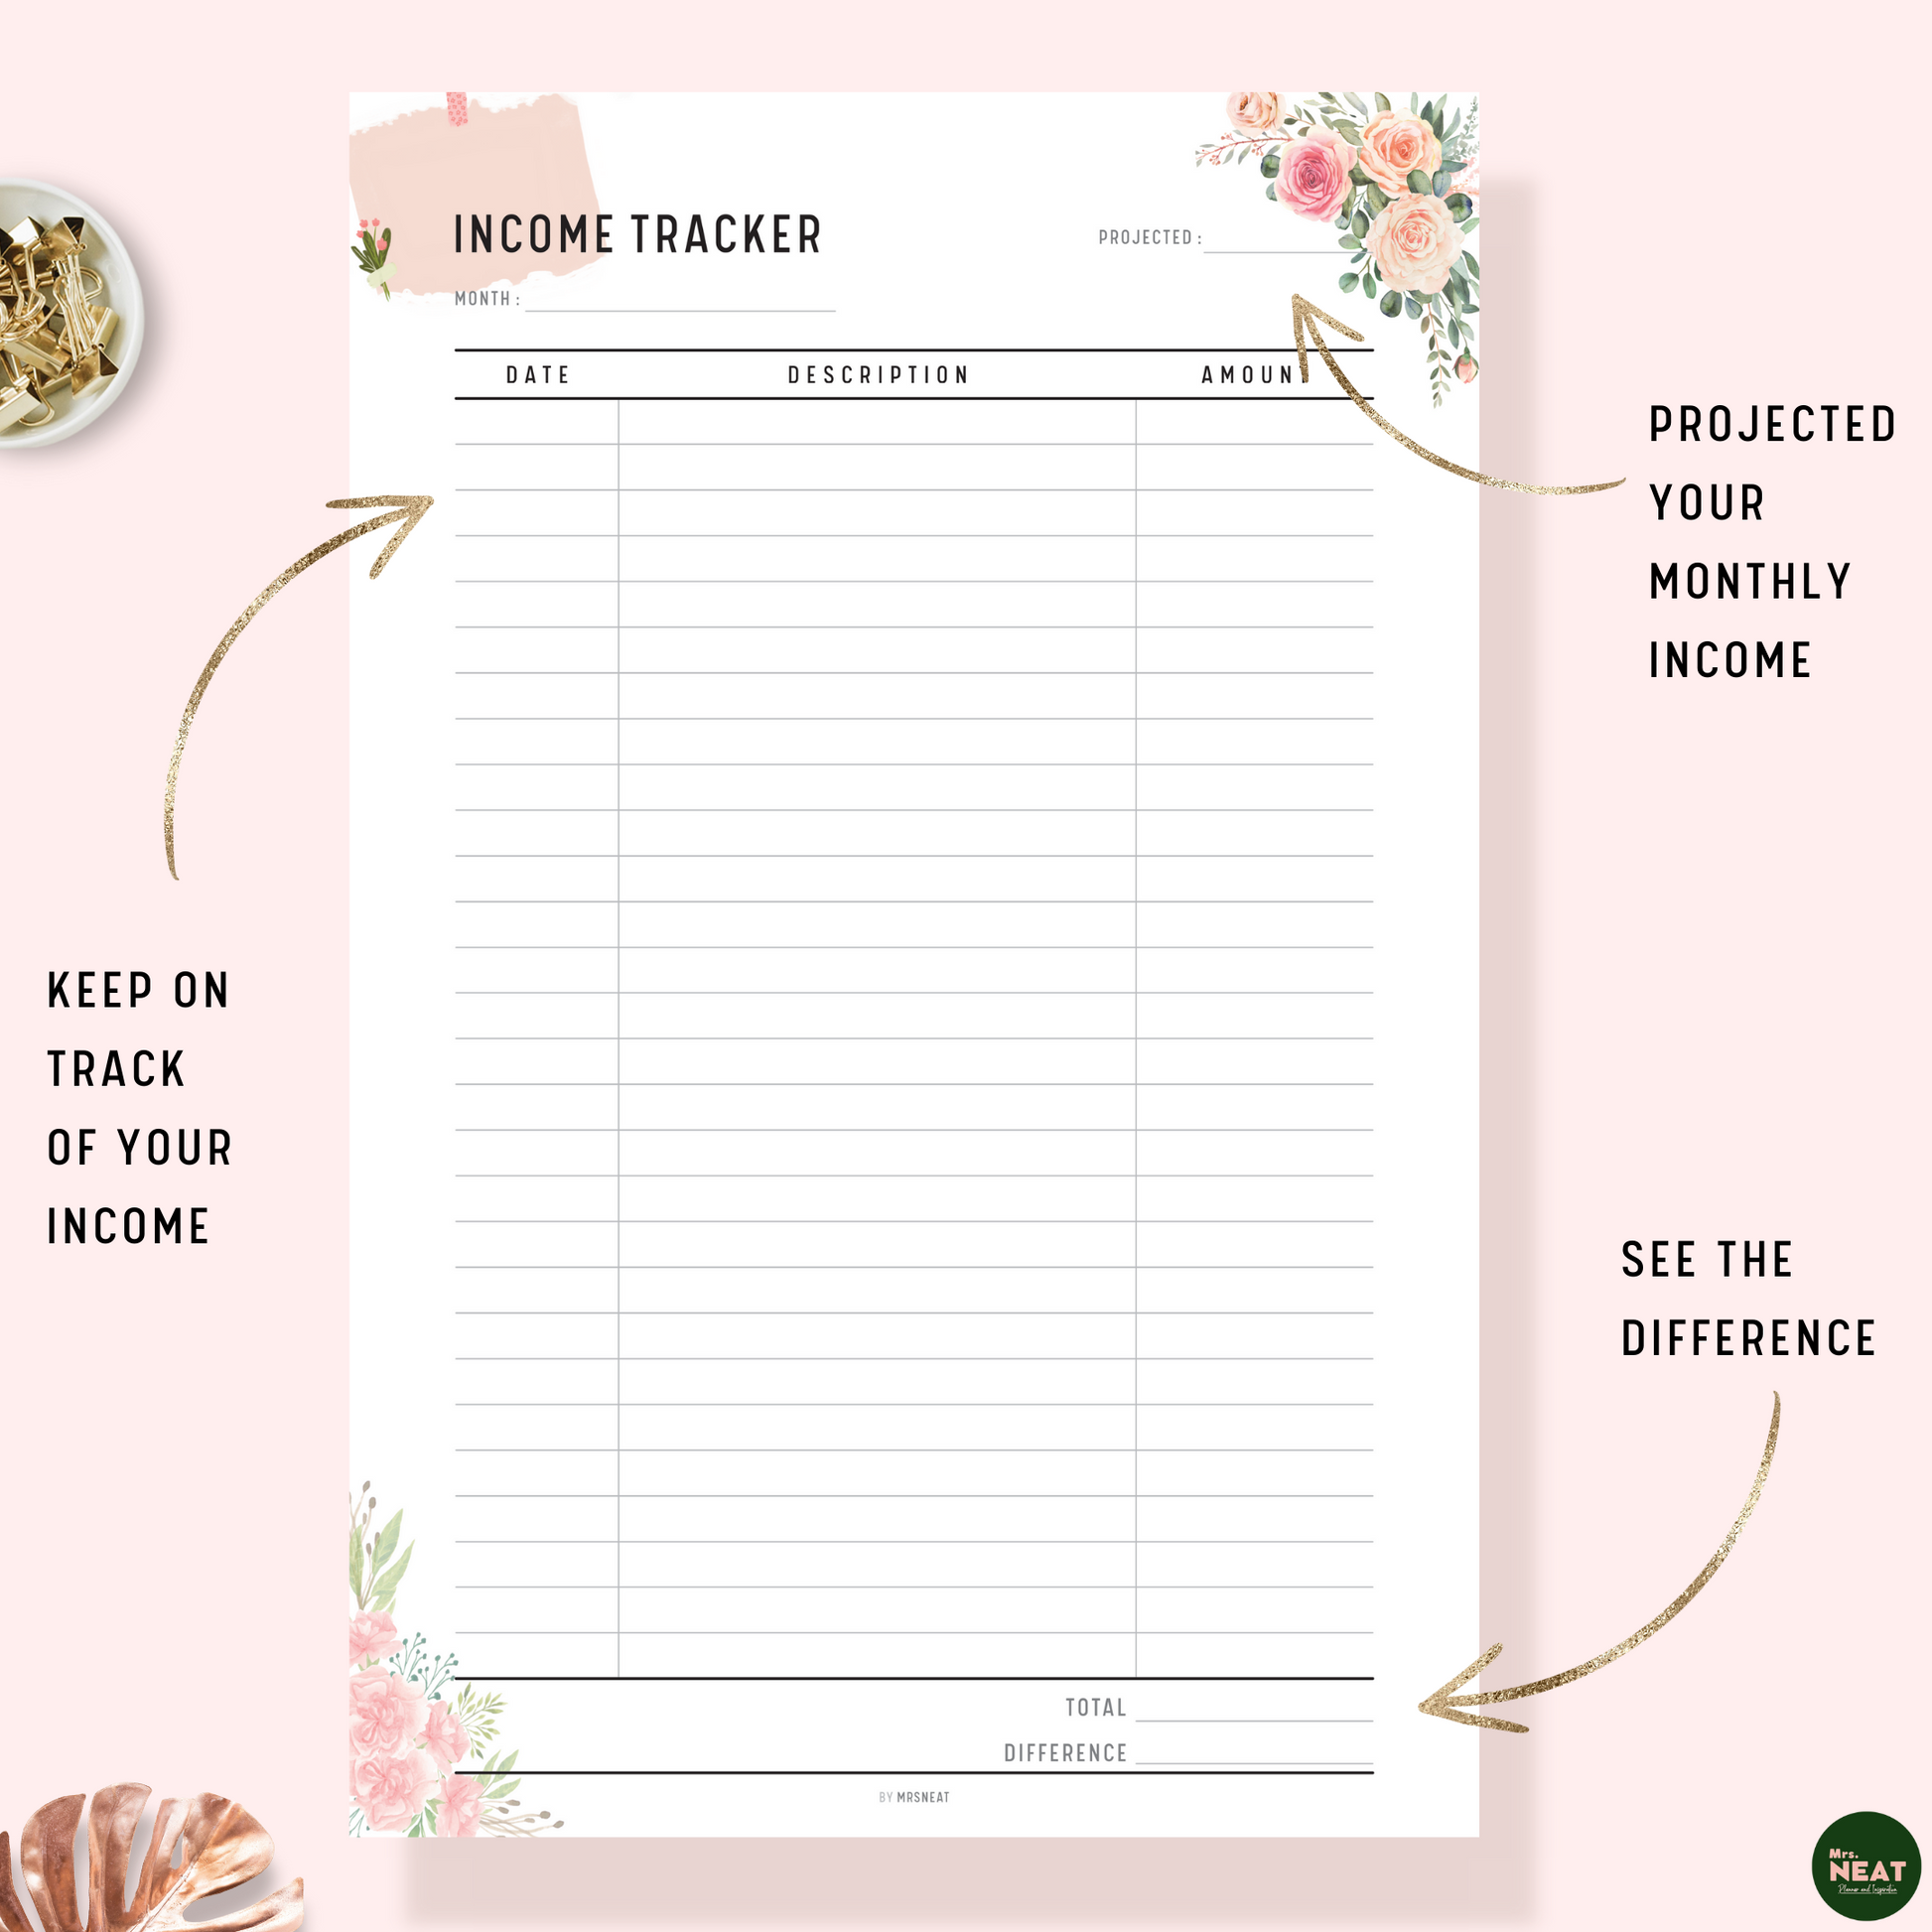 Floral Income Tracker Planner with room for monthly projected, actual incomes, total and differences